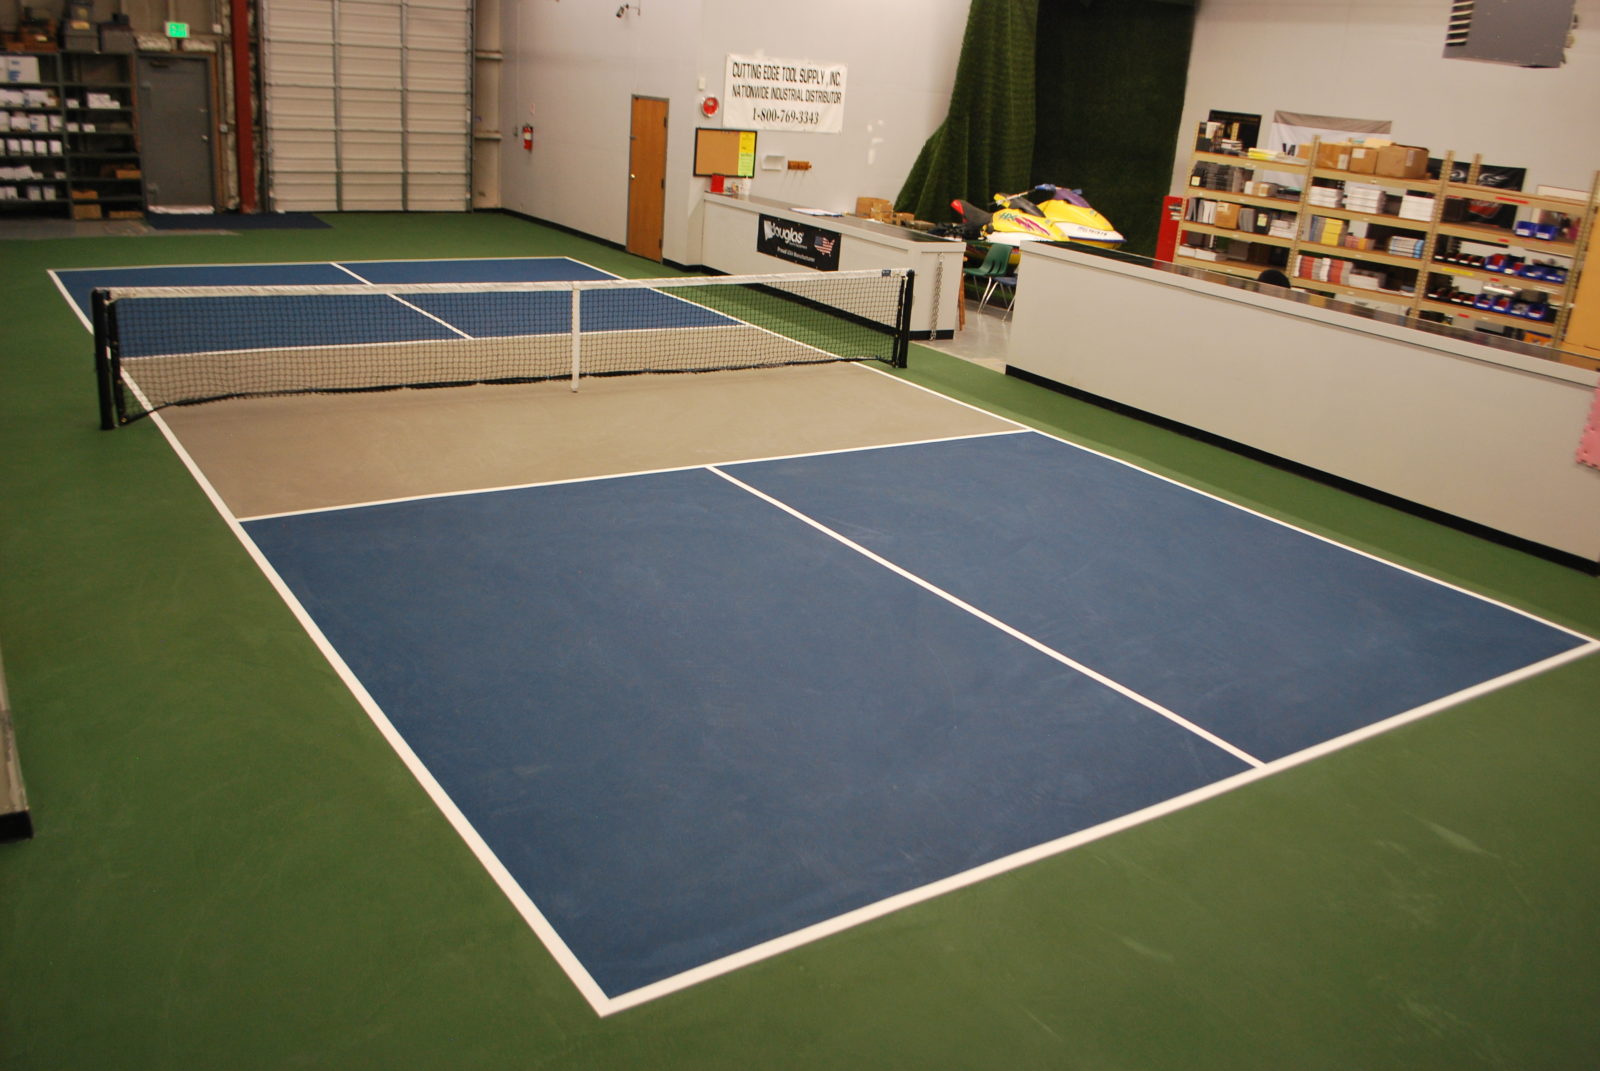 Gallery Welcome to Colorado Springs Pickleball